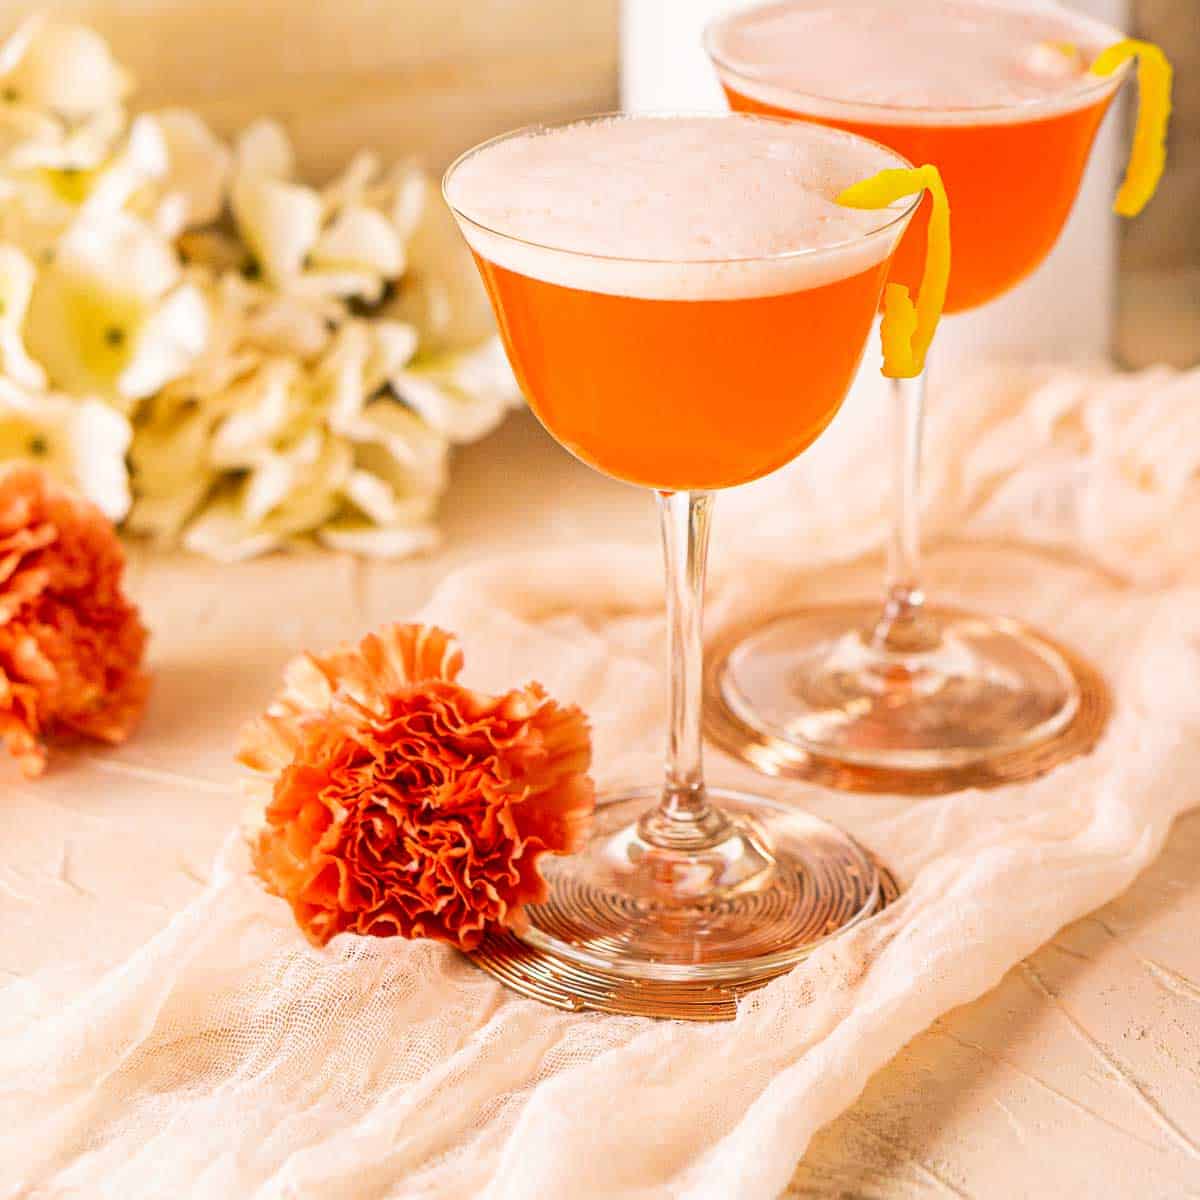 Two Aperol sour cocktails with orange flowers around them.